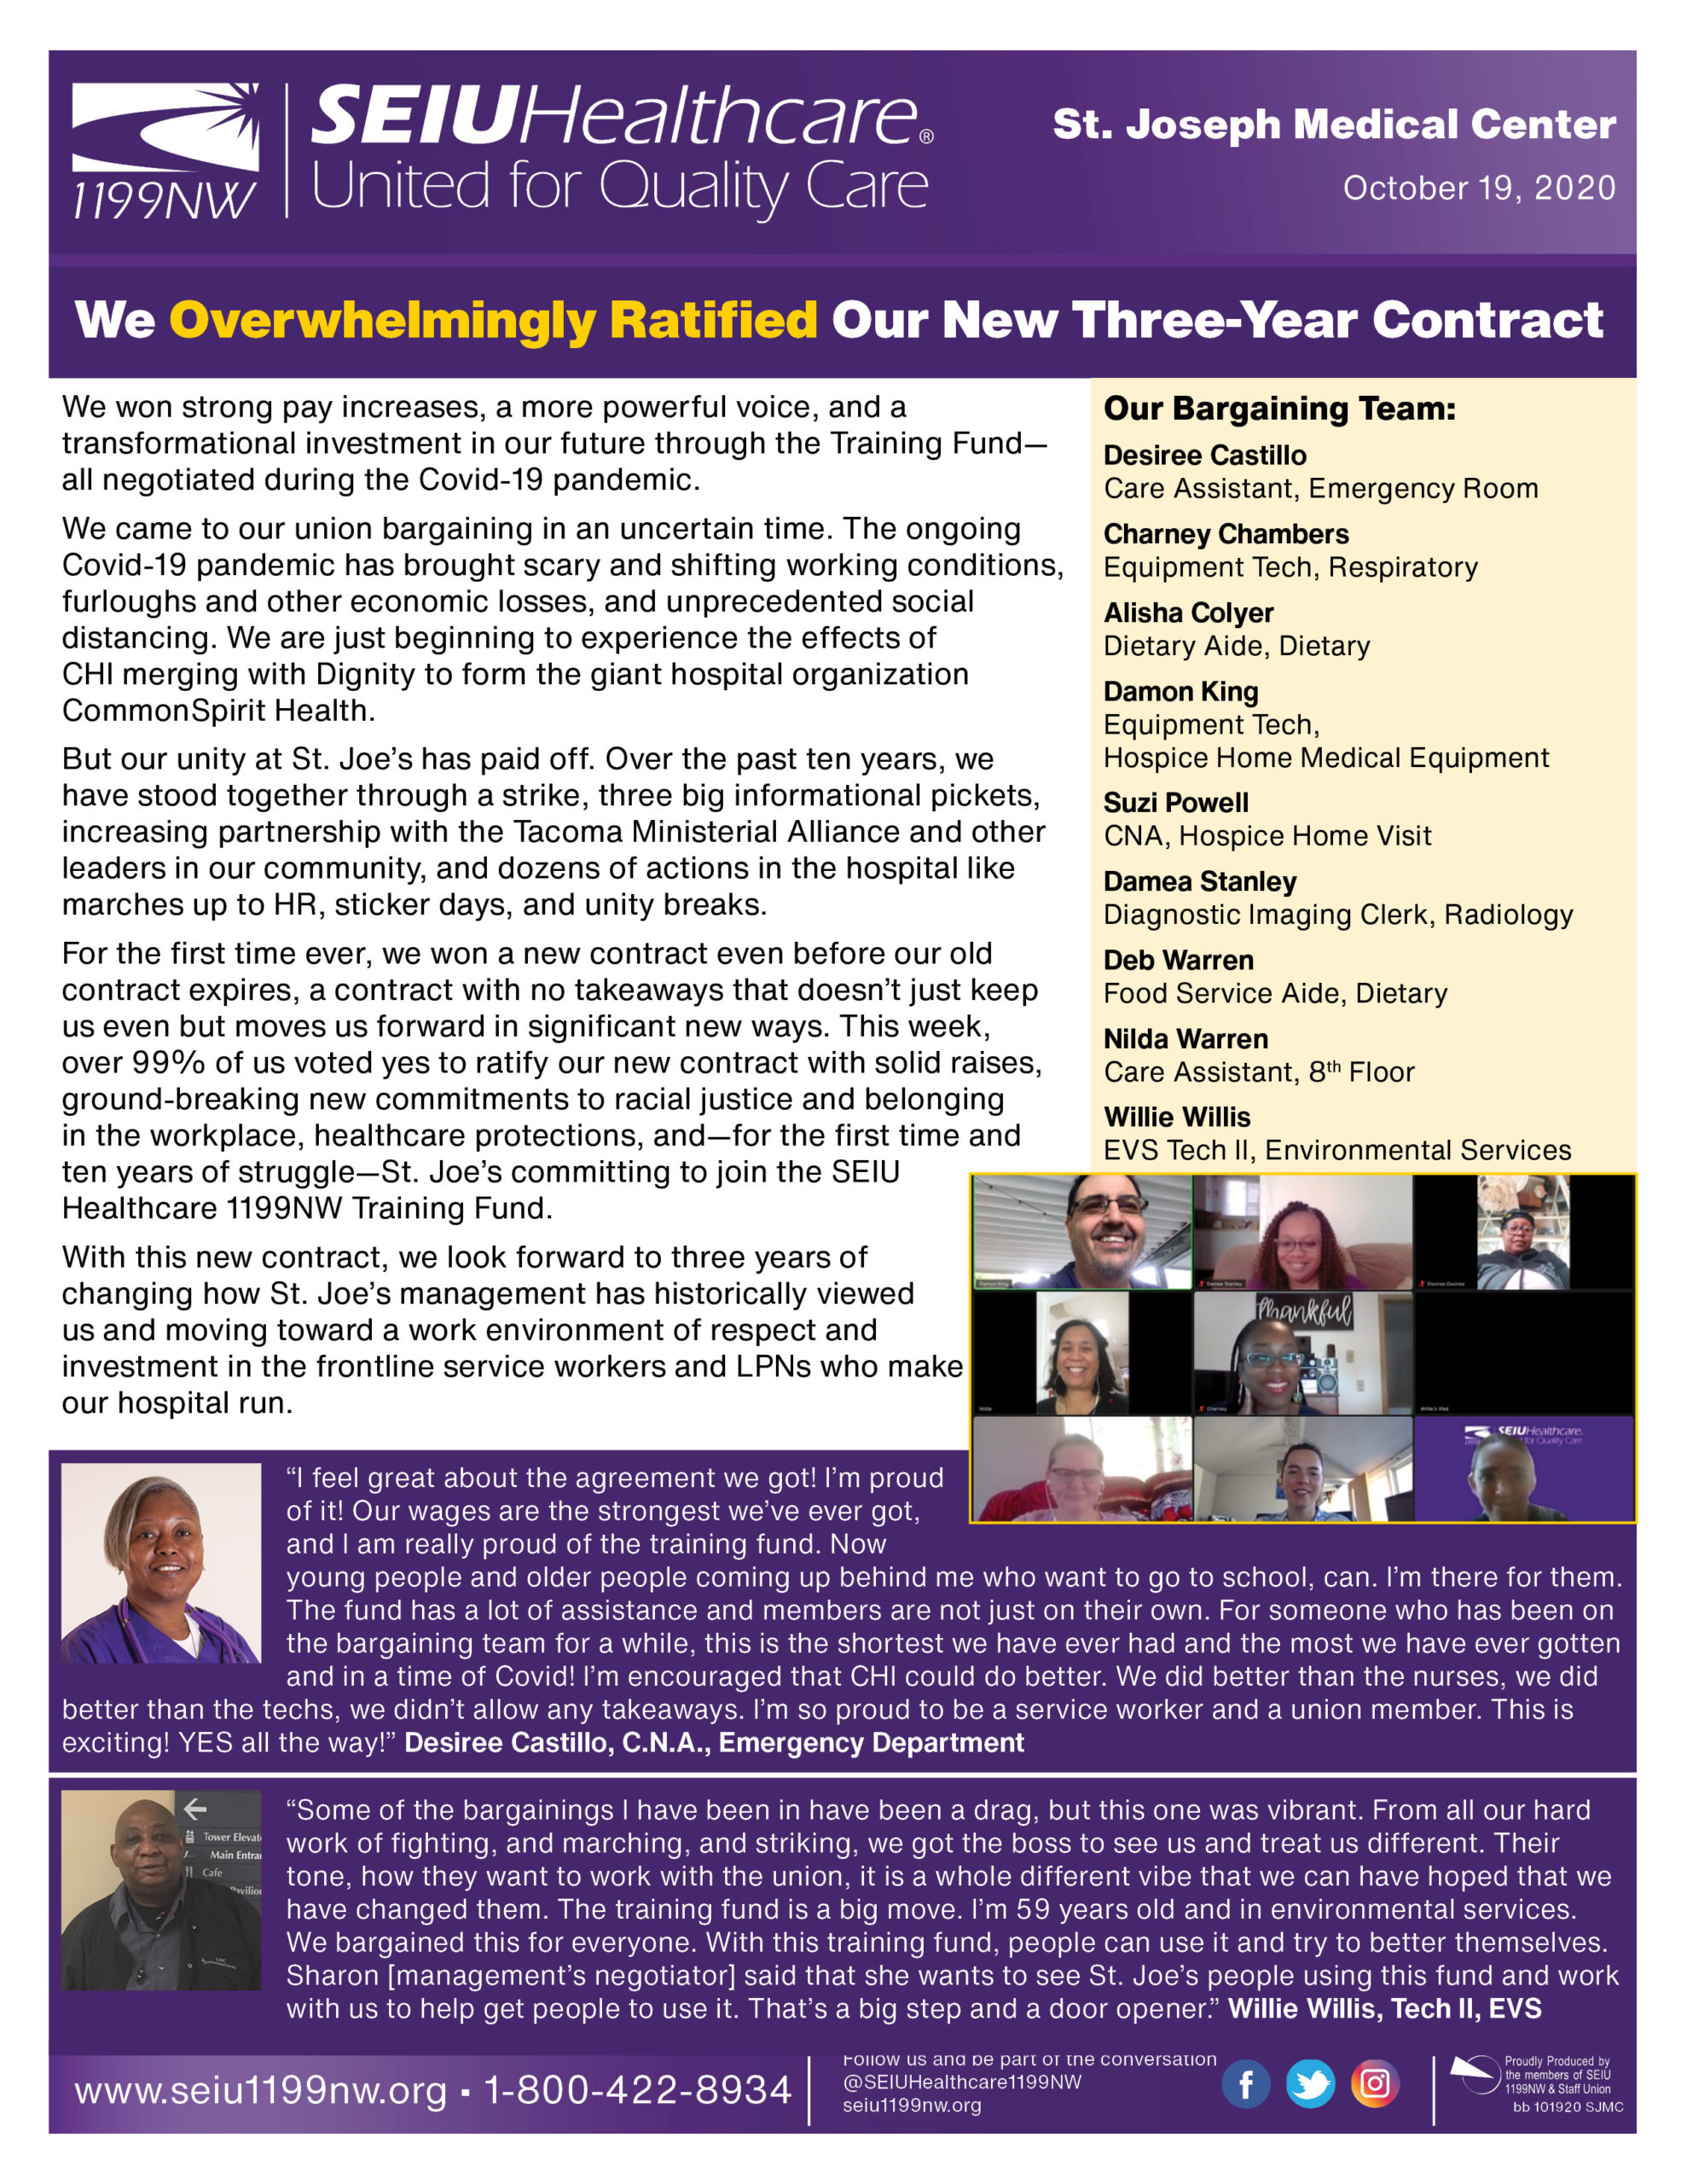 We Overwhelmingly Ratified Our New Three-Year Contract